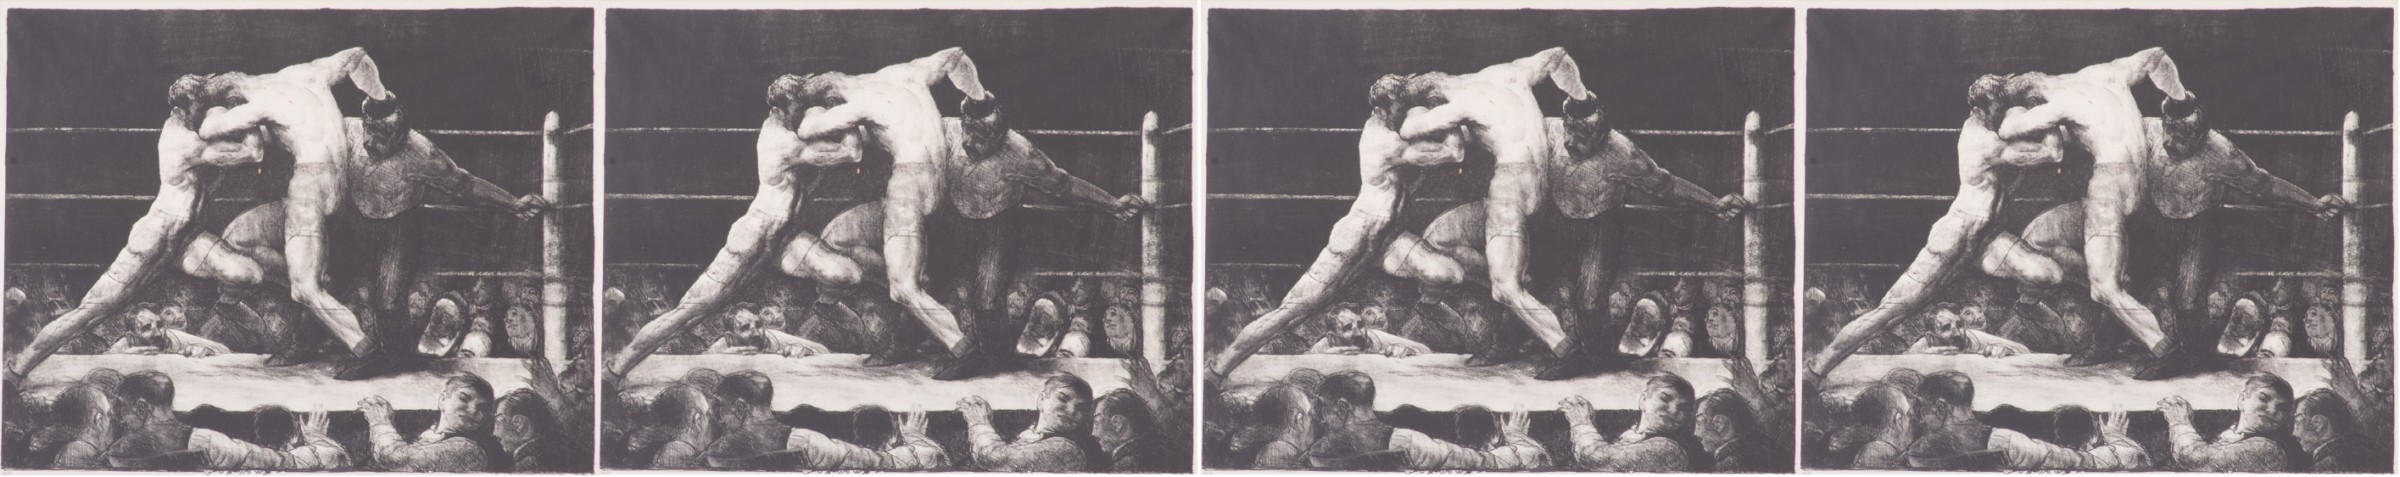 Six Degrees of George Wesley Bellows